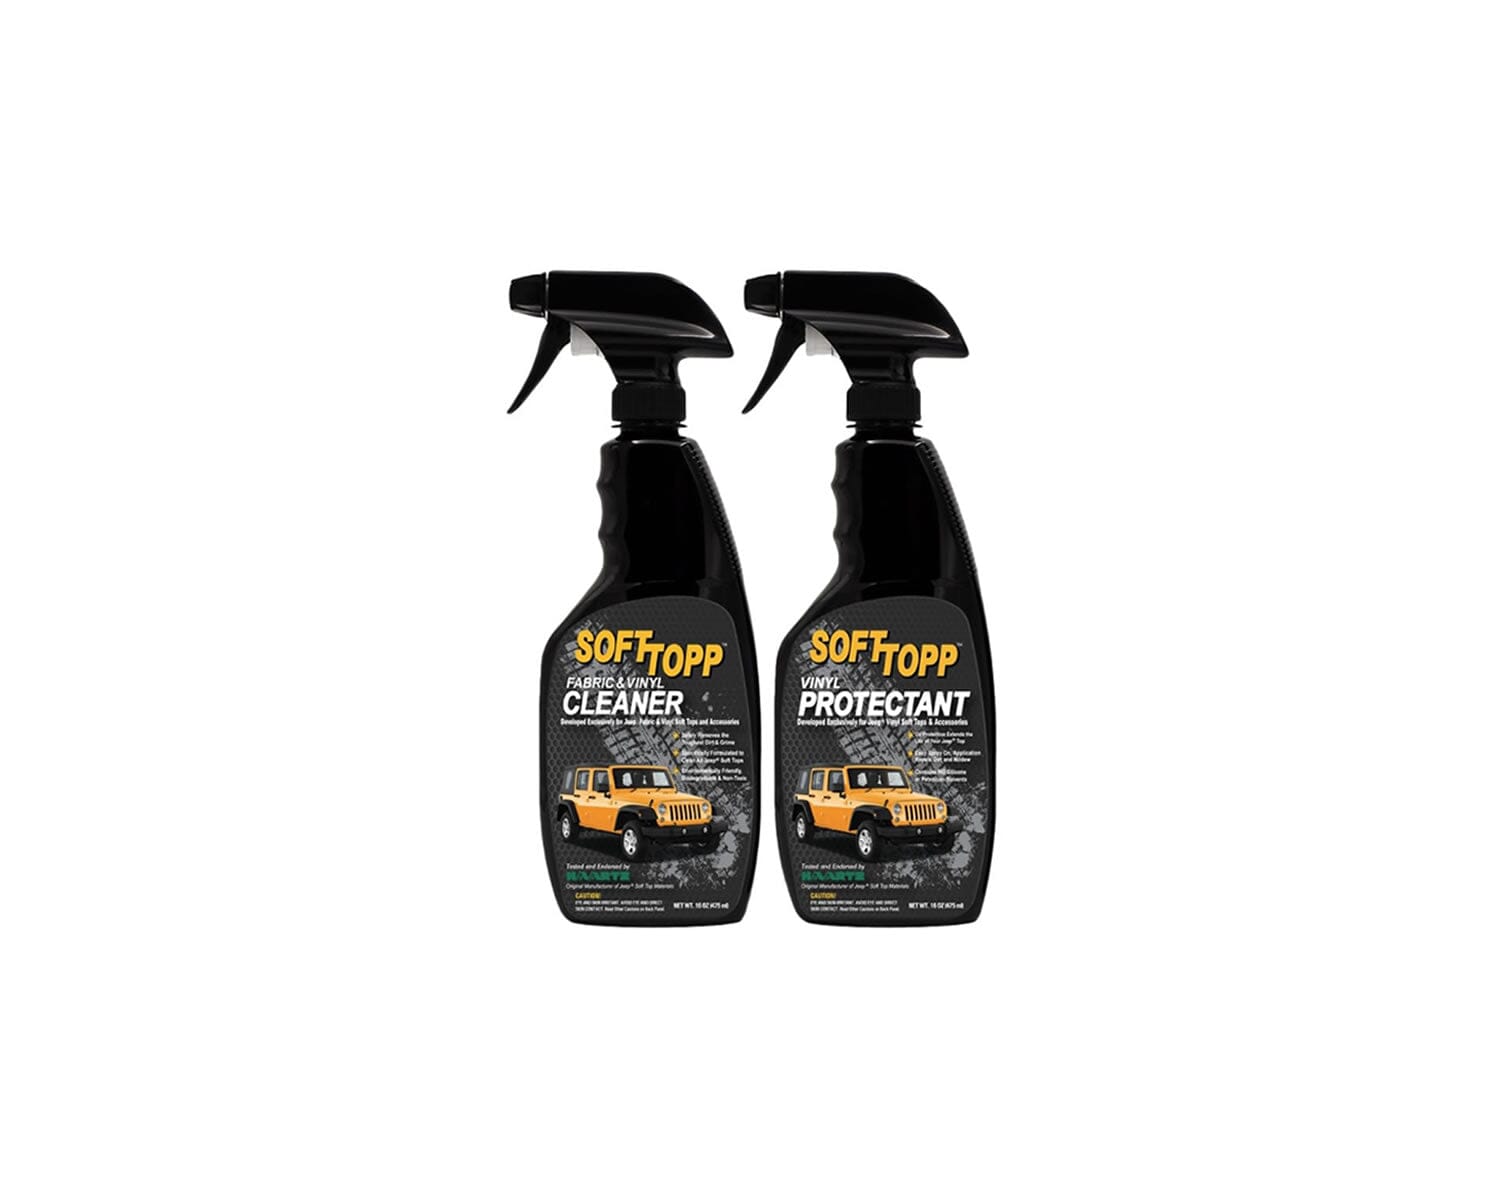 Vinyl & Canvas Convertible Top Cleaner and Protectant by Raggtopp